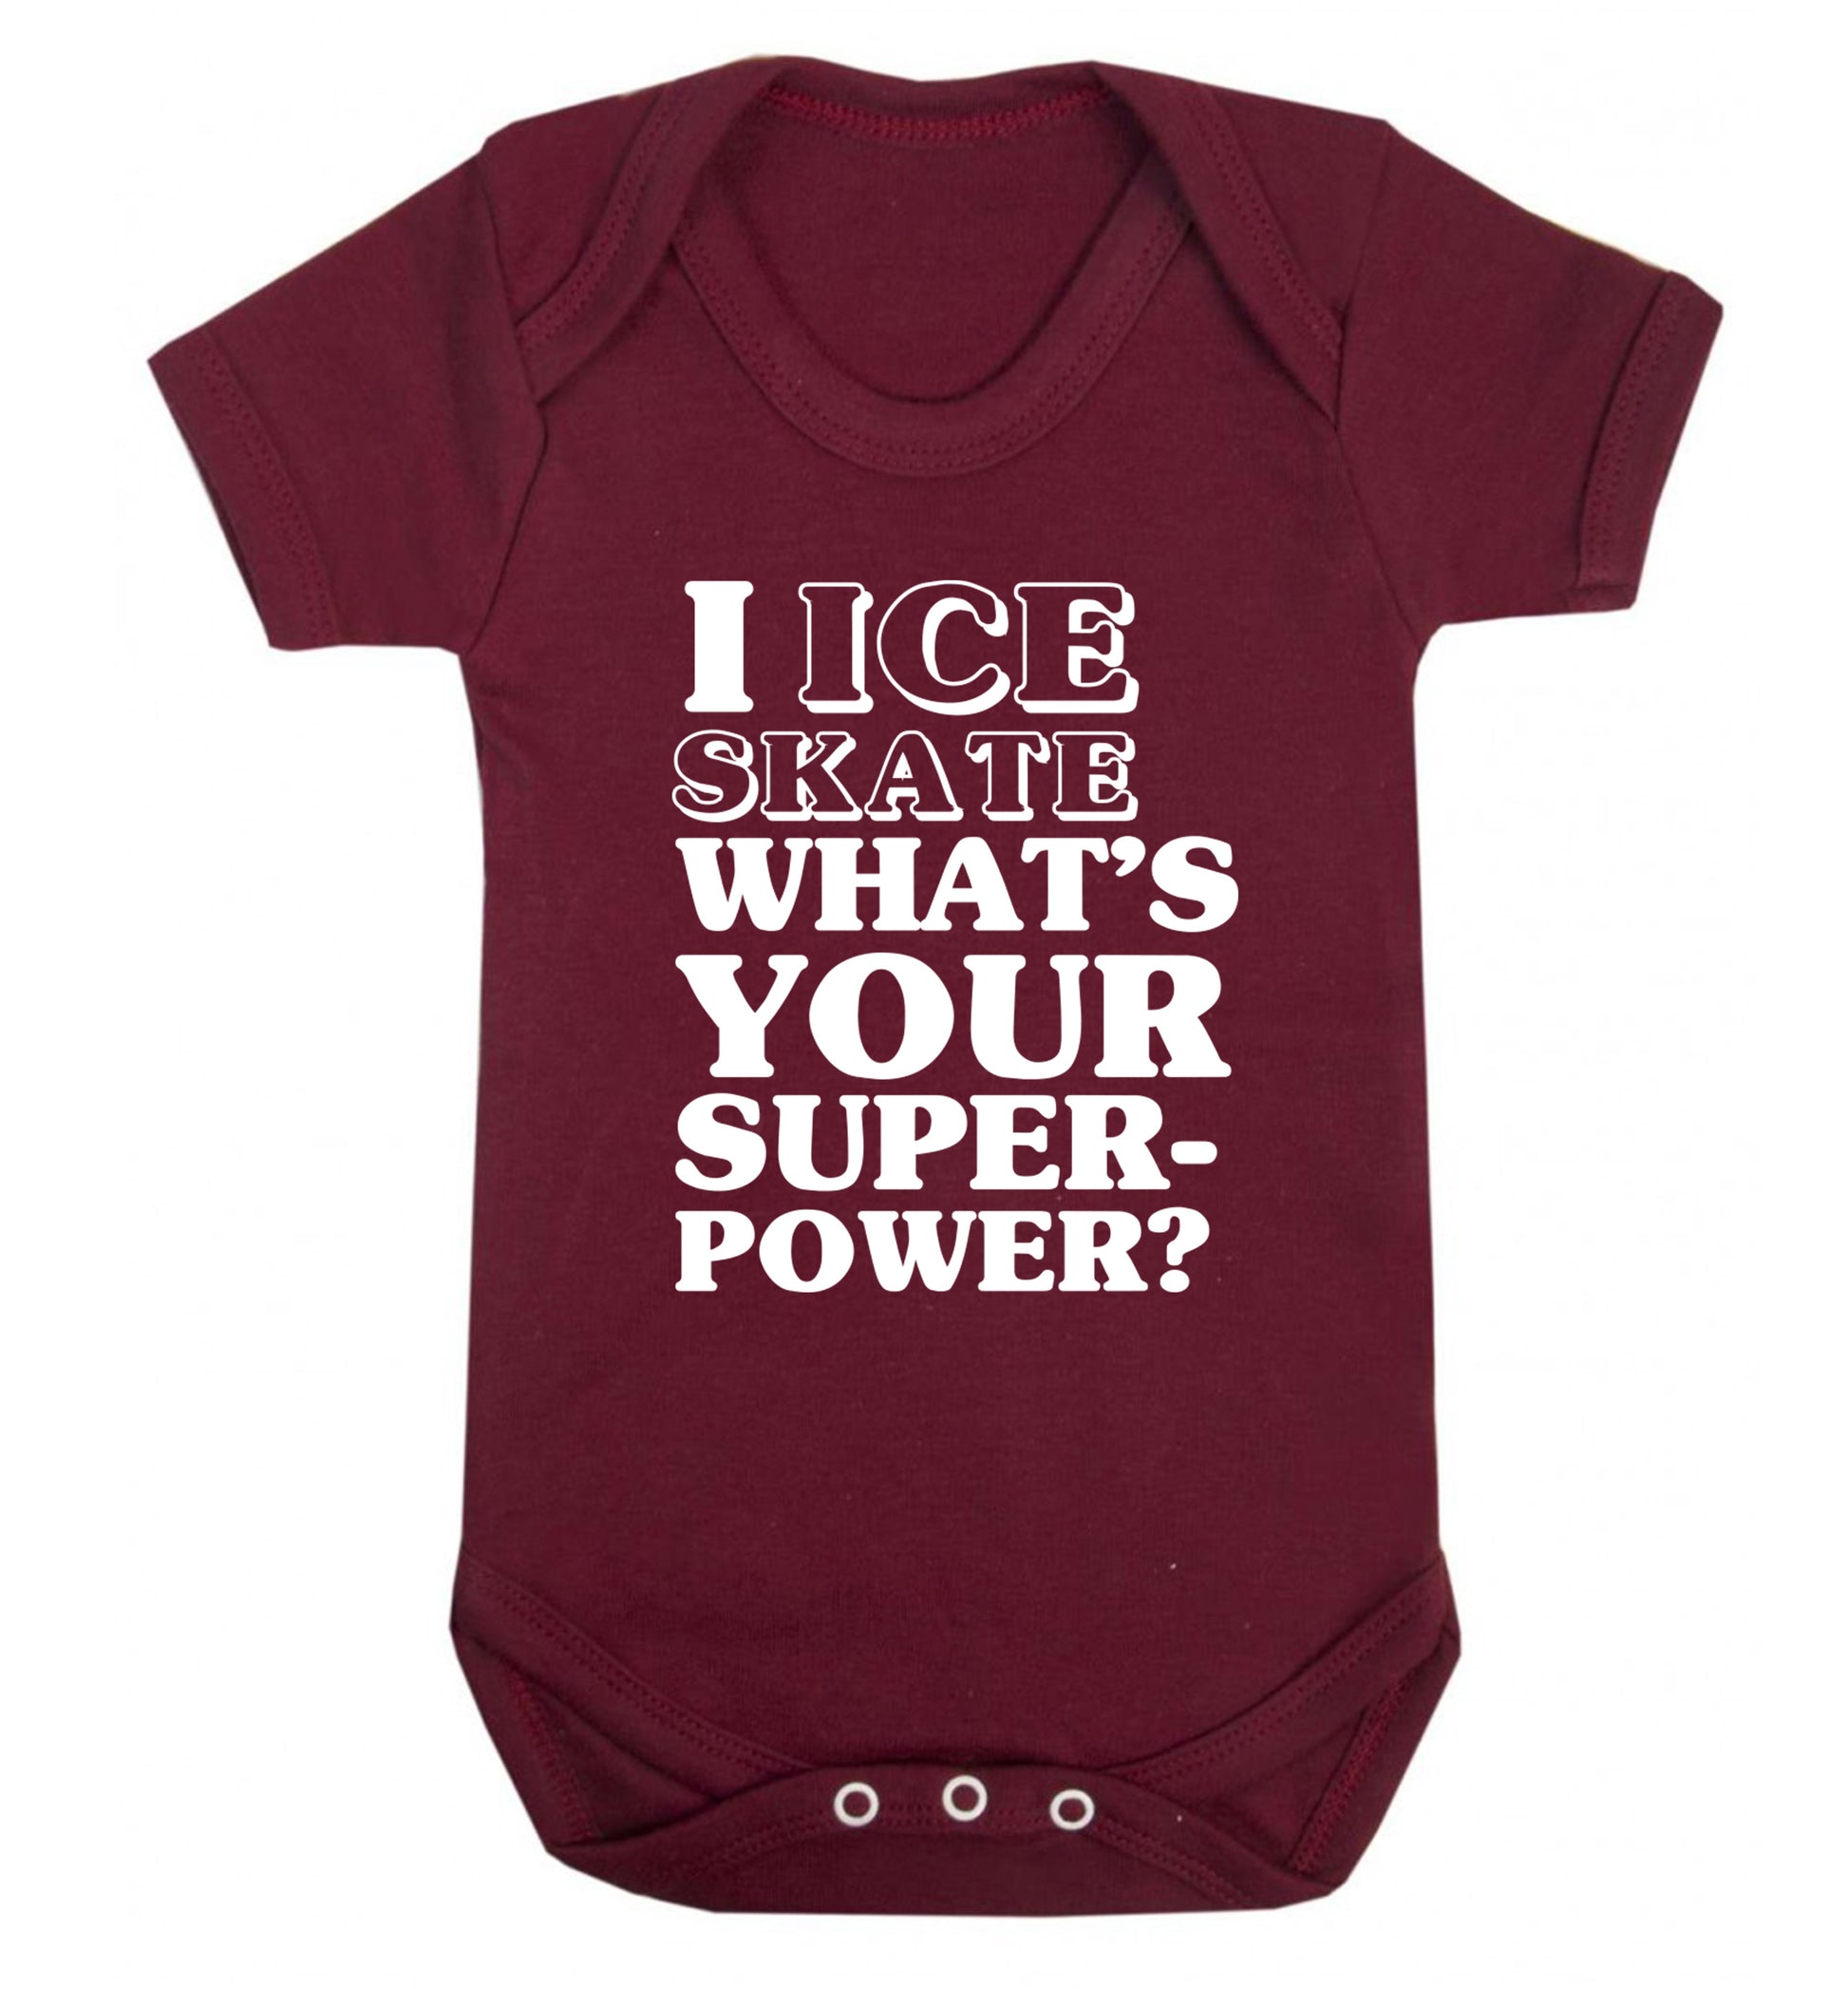 I ice skate what's your superpower? Baby Vest maroon 18-24 months